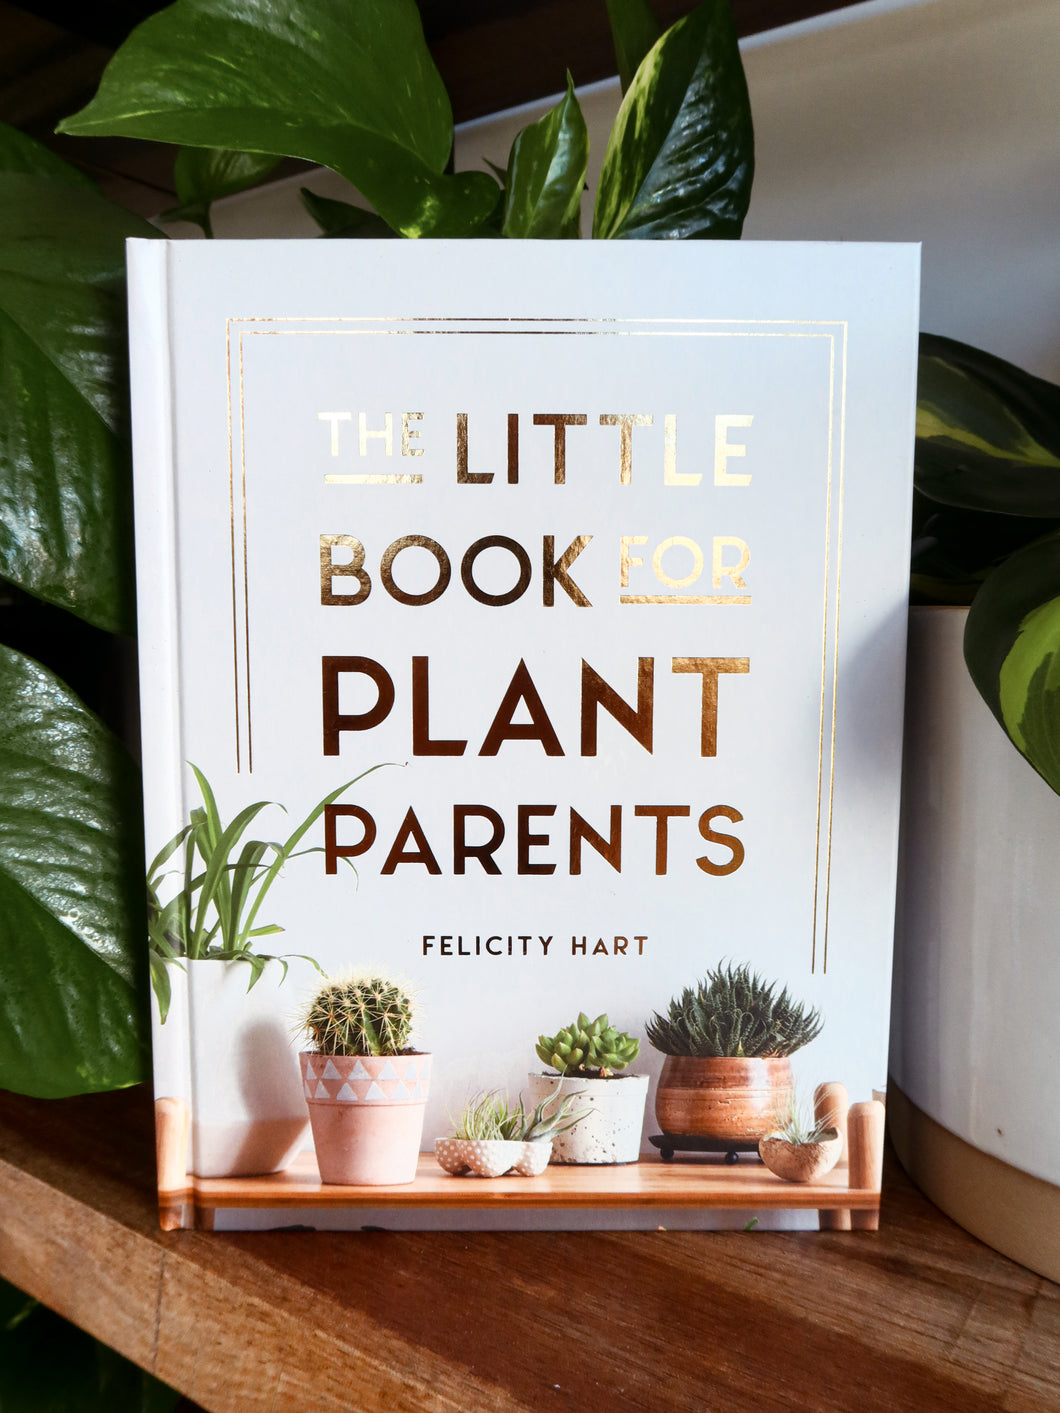 The Little Book for Plant Parents by Felicity Hart